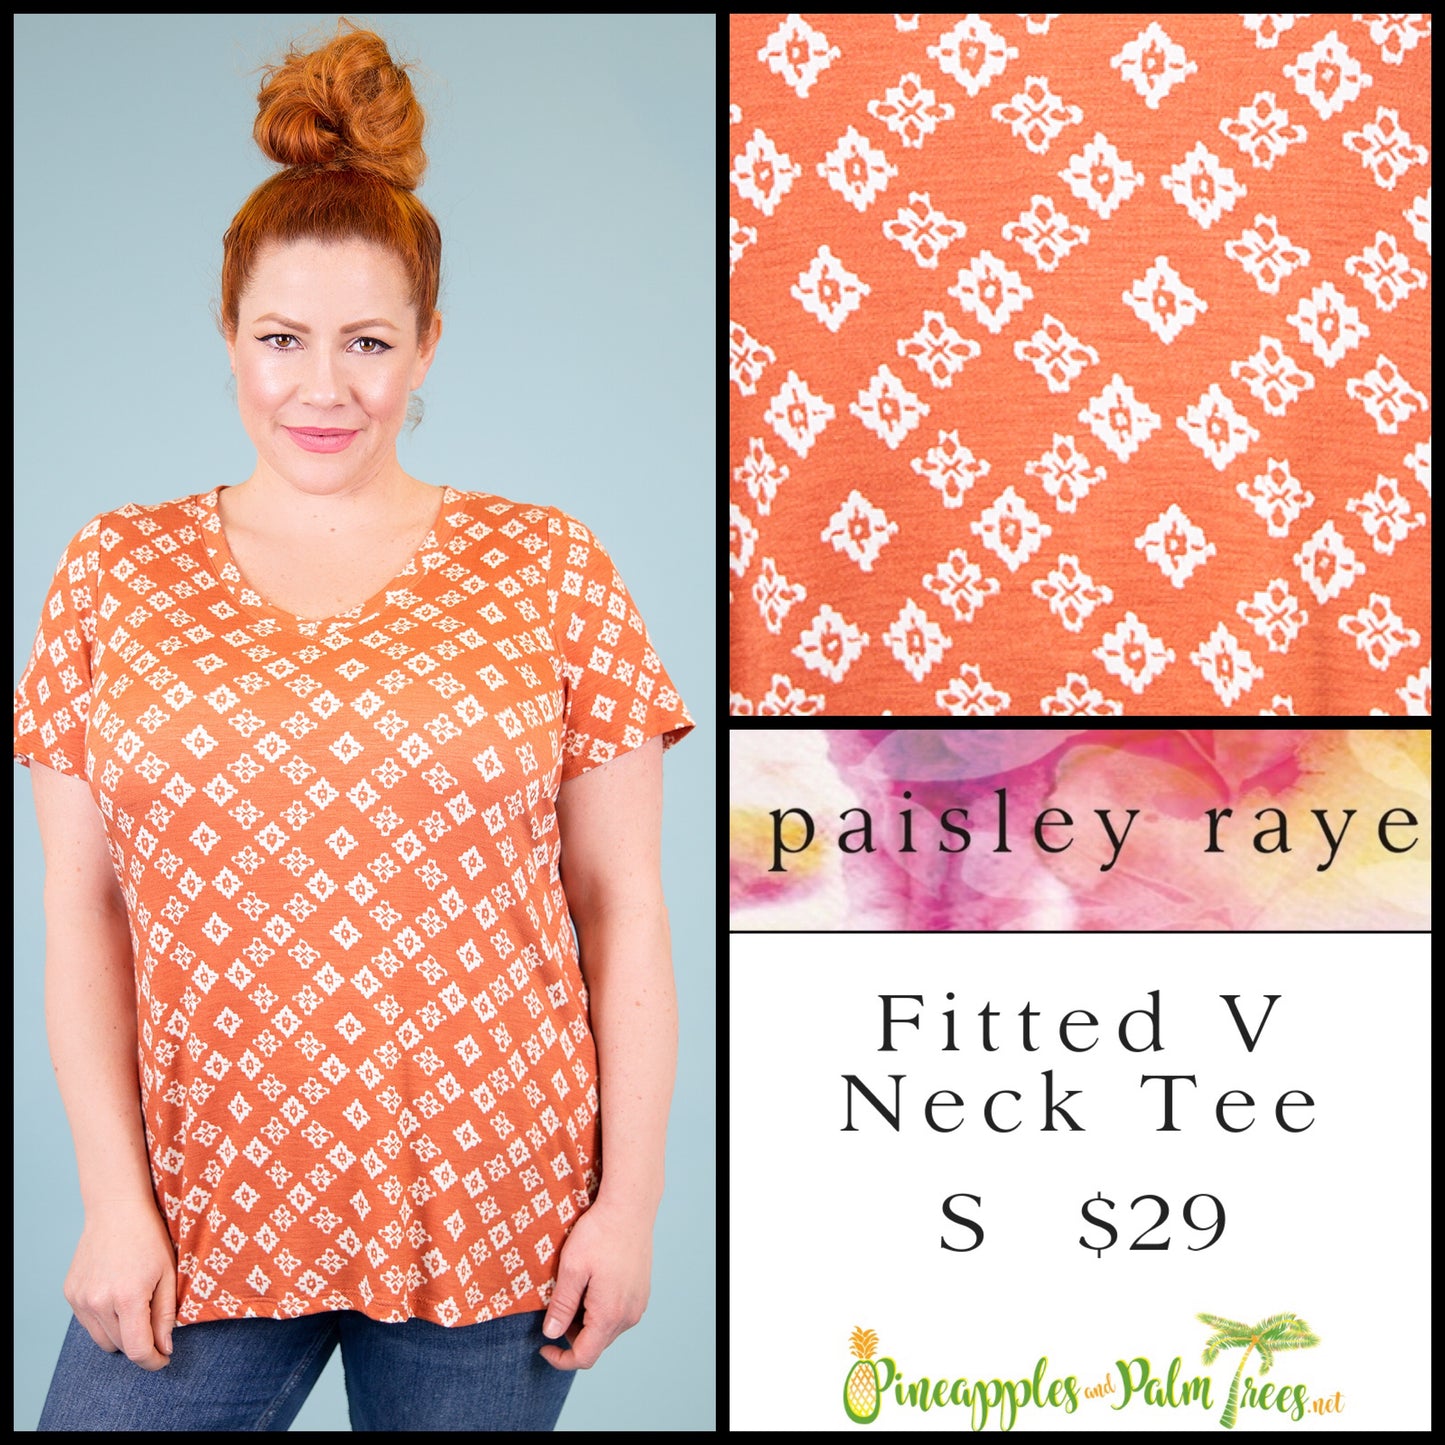 Top: Fitted V Neck Tee S - orange